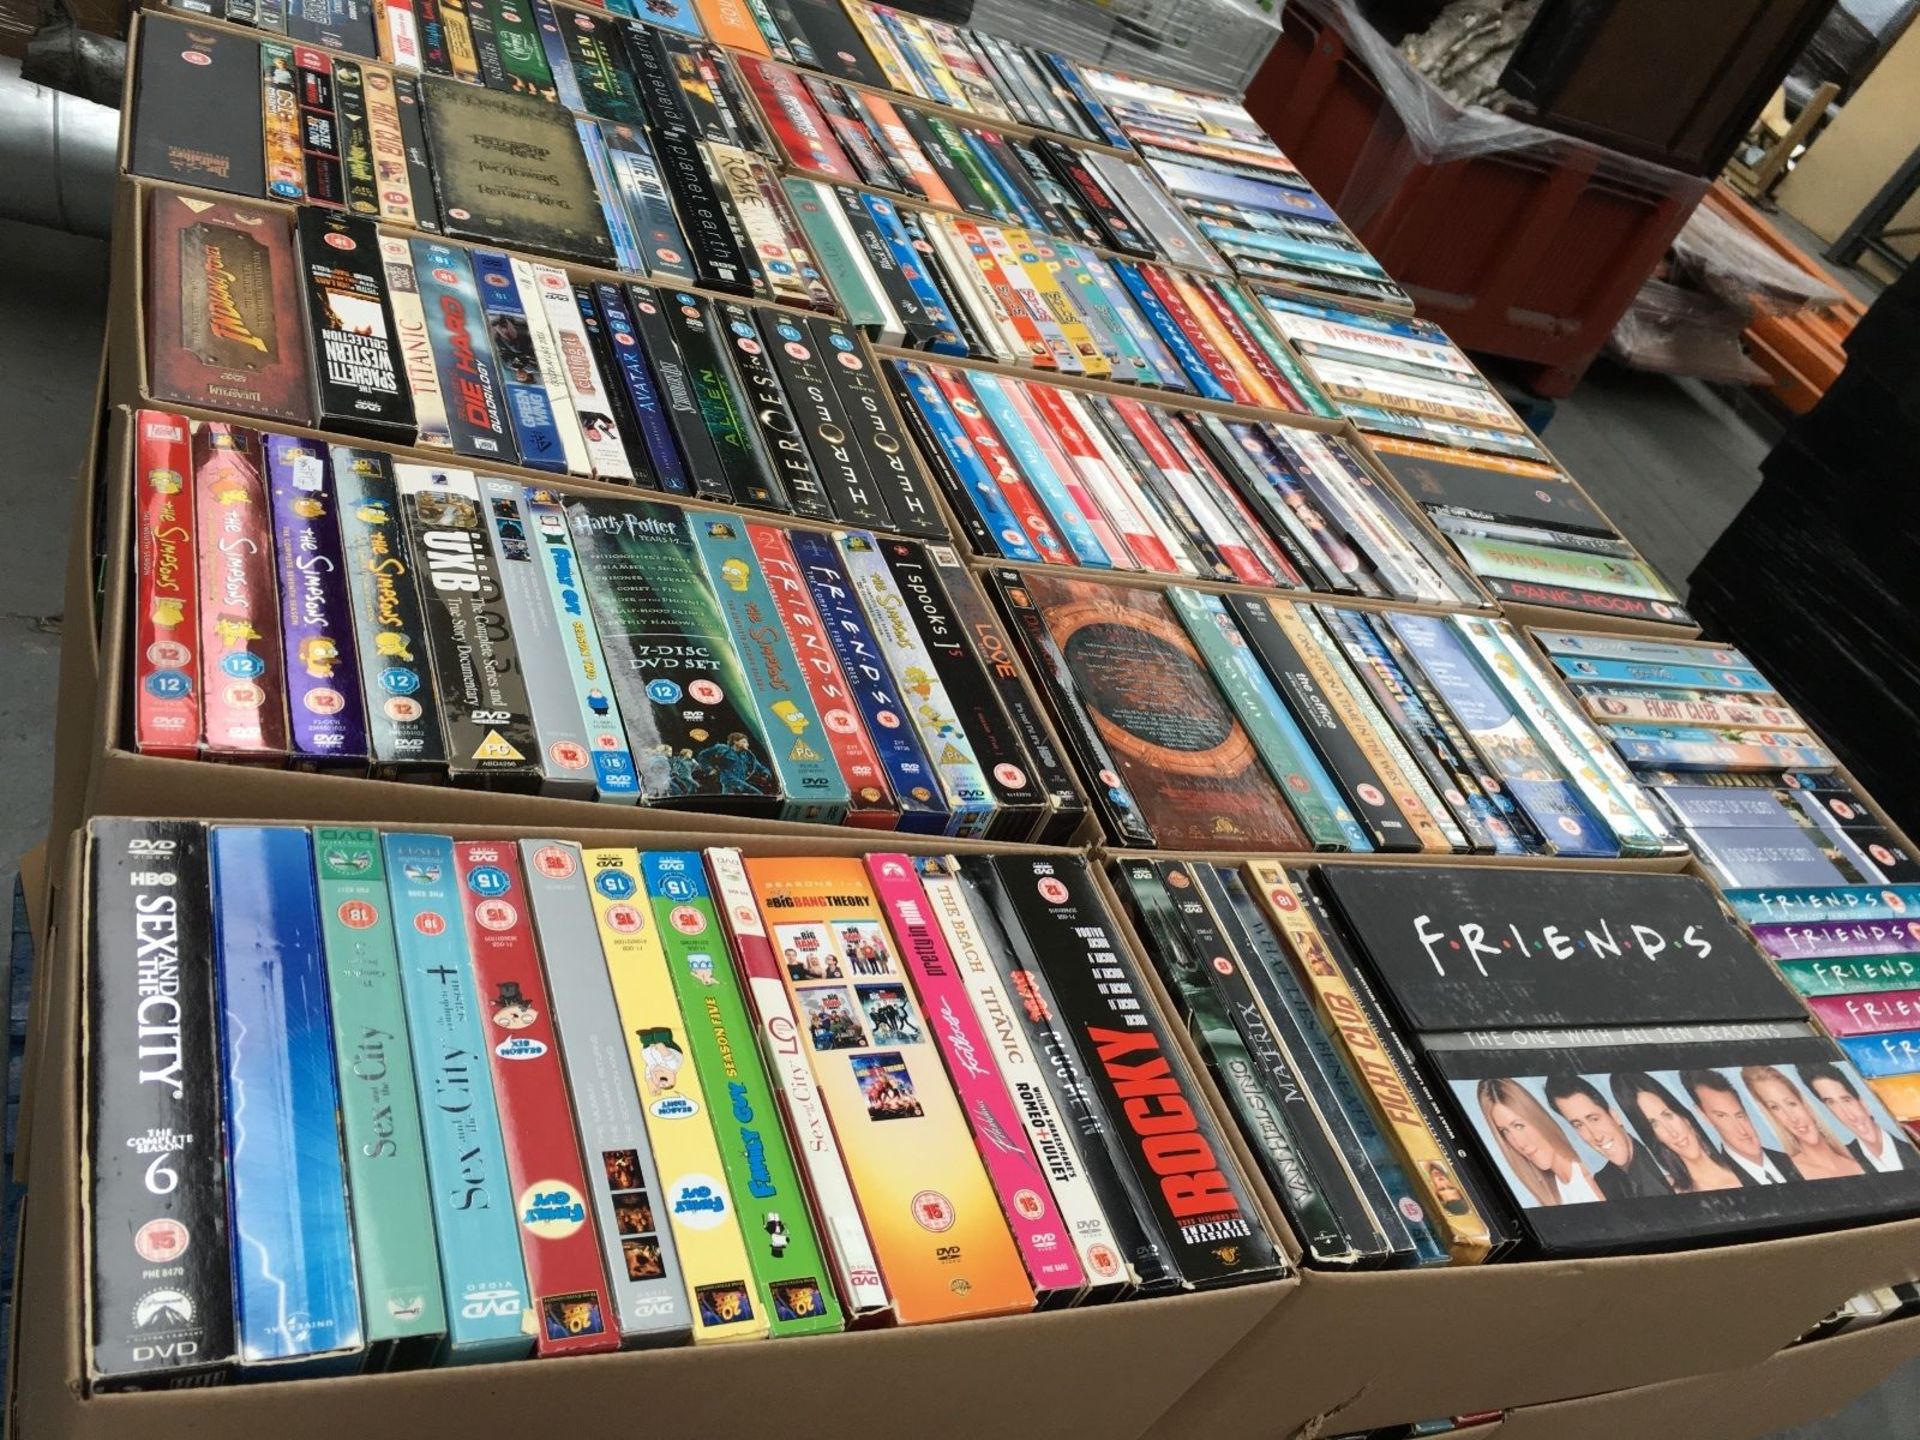 JOB LOT OF 100 x VARIOUS DVD'S - REGION 2 - USED - GOOD ASSORTMENT OF TITLES - NO RESERVE - Image 3 of 4